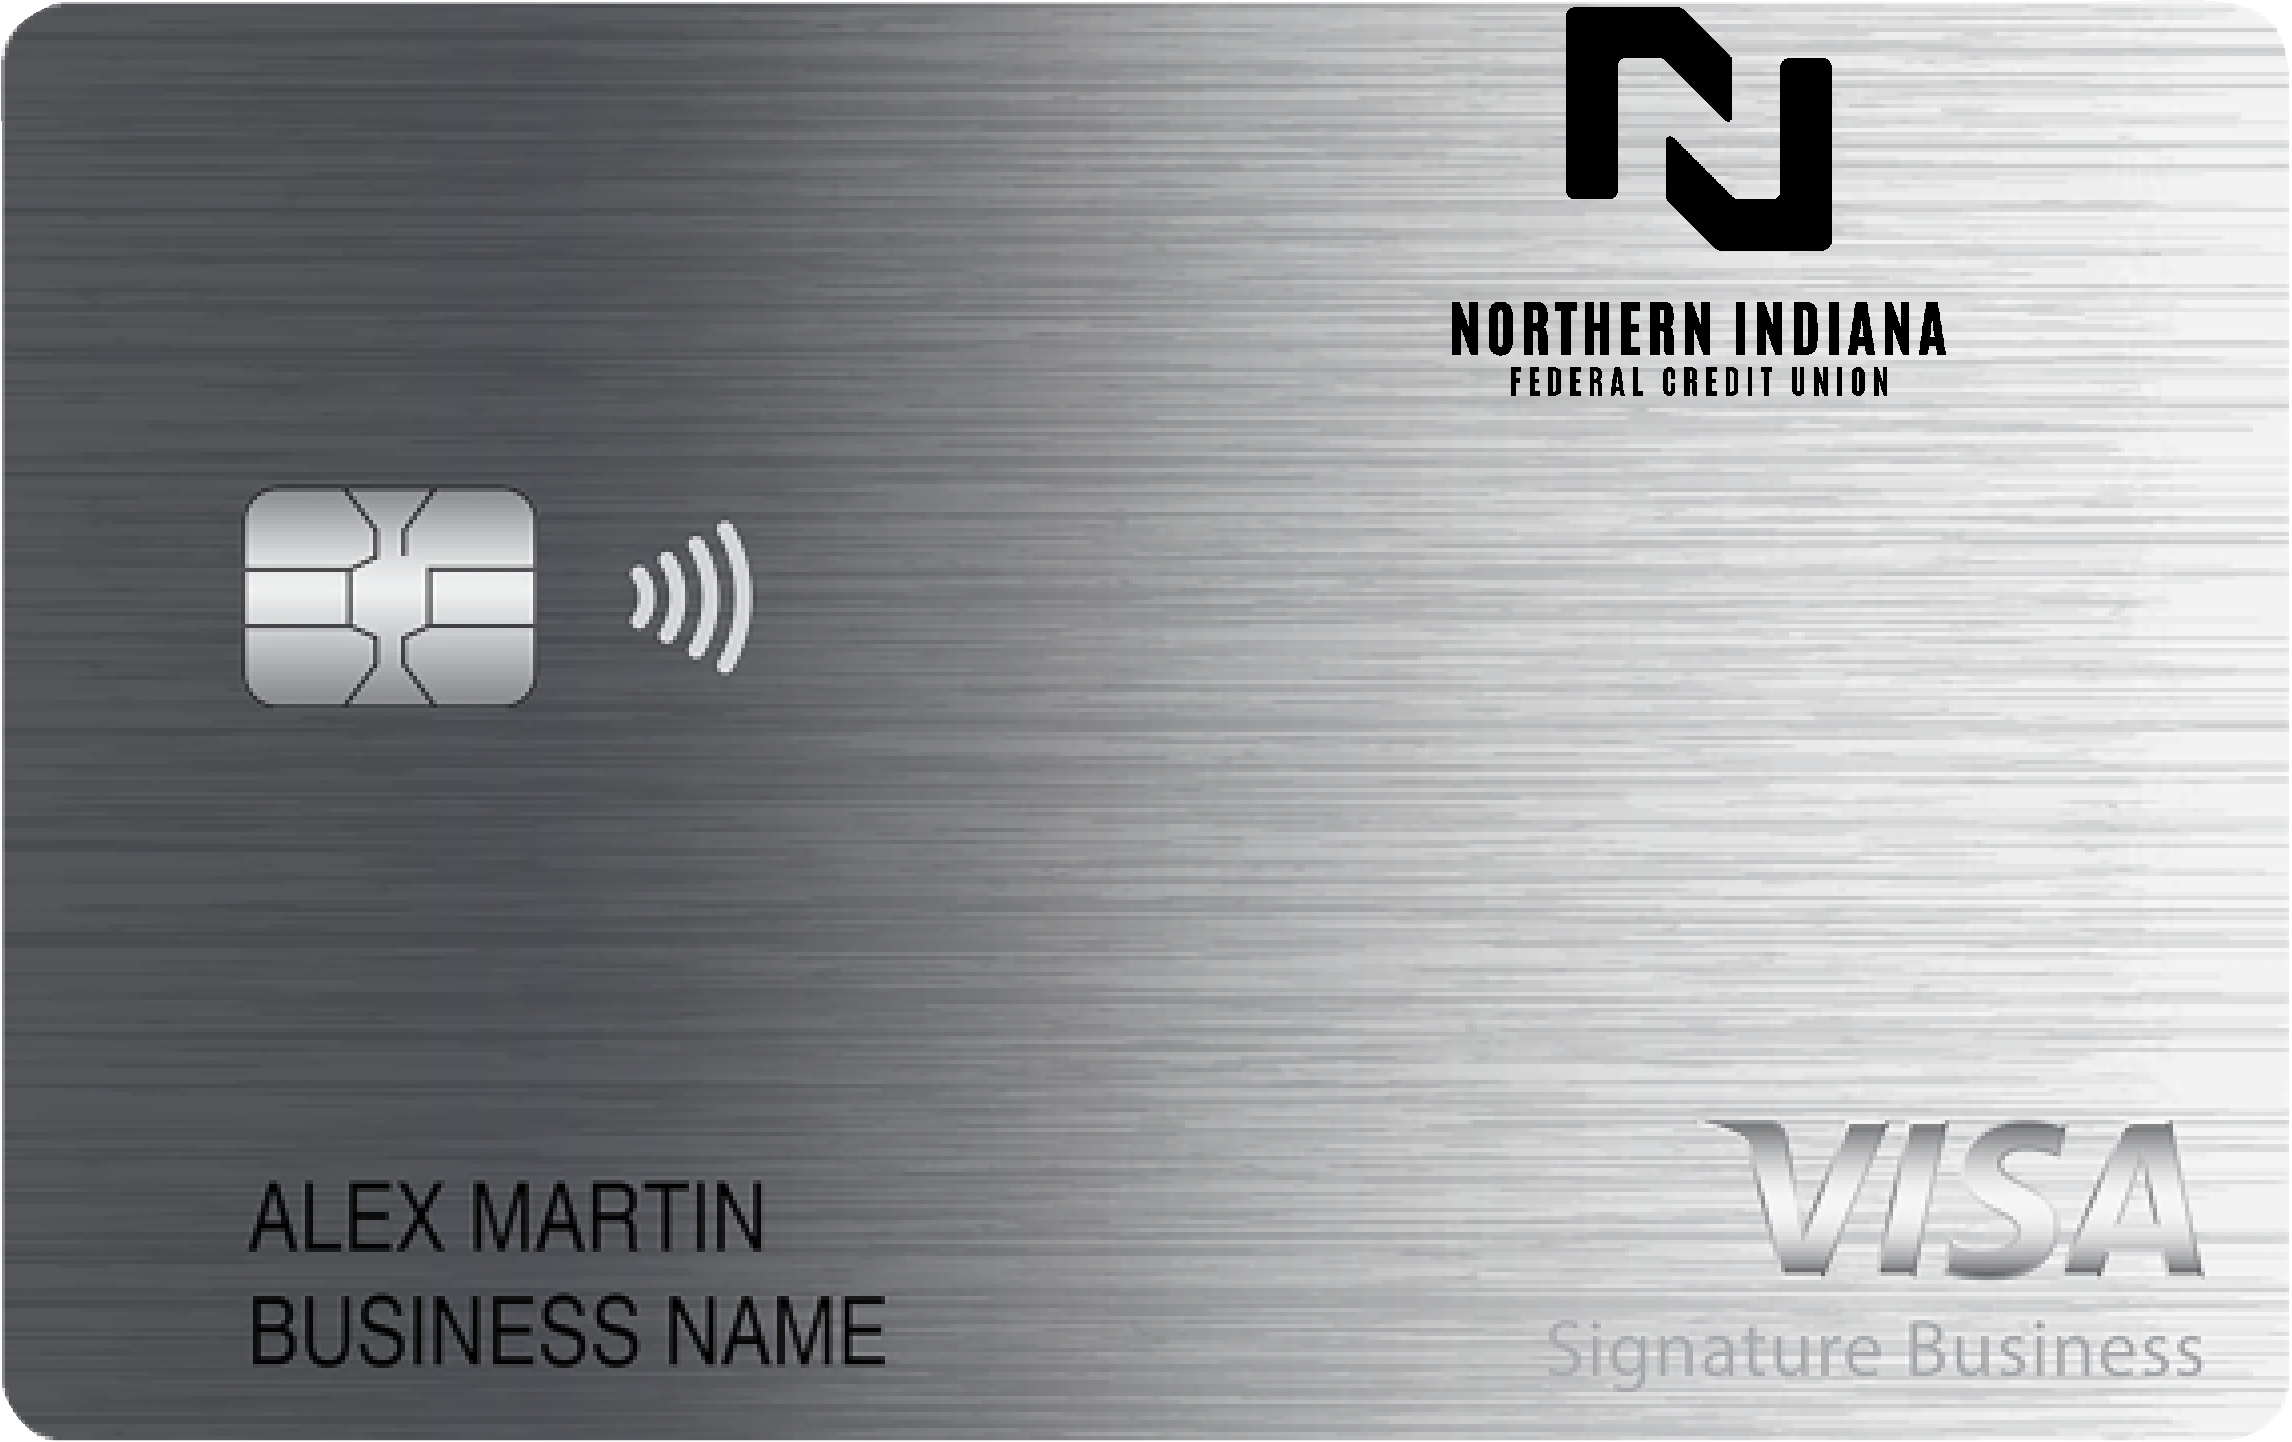 Northern Indiana Federal Credit Union Smart Business Rewards Card